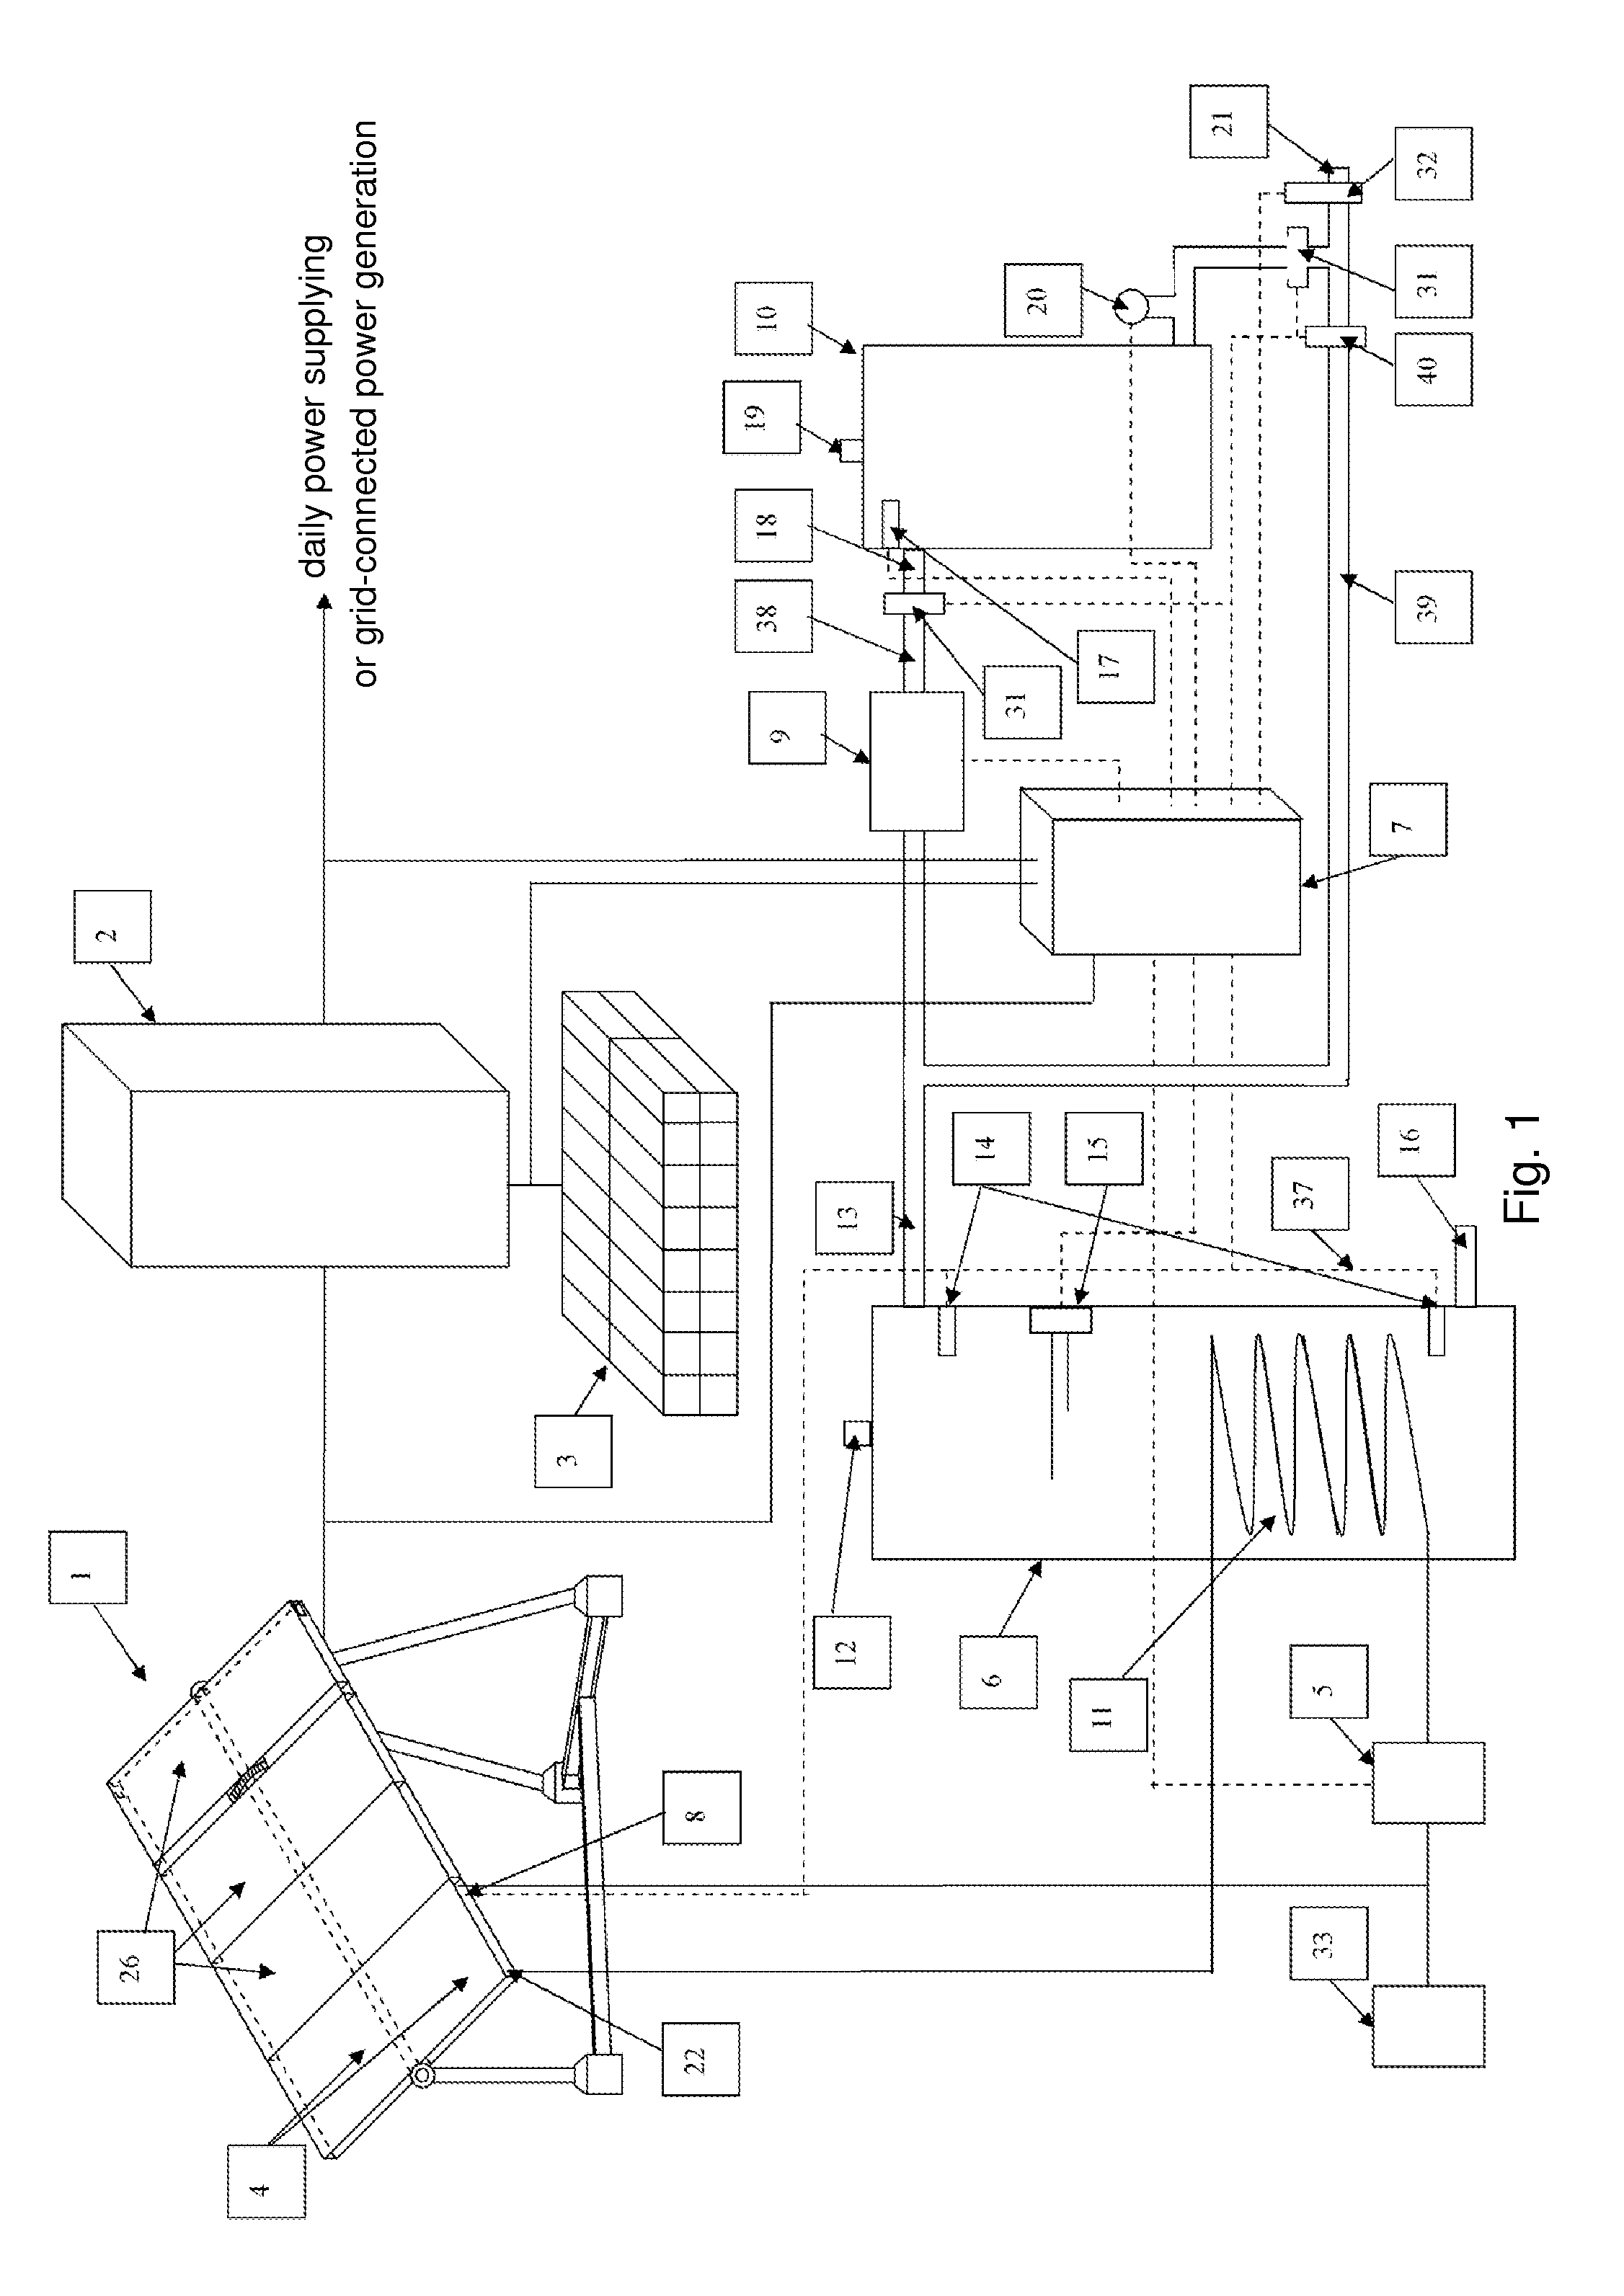 Distributed solar power generation and hot water supplying system